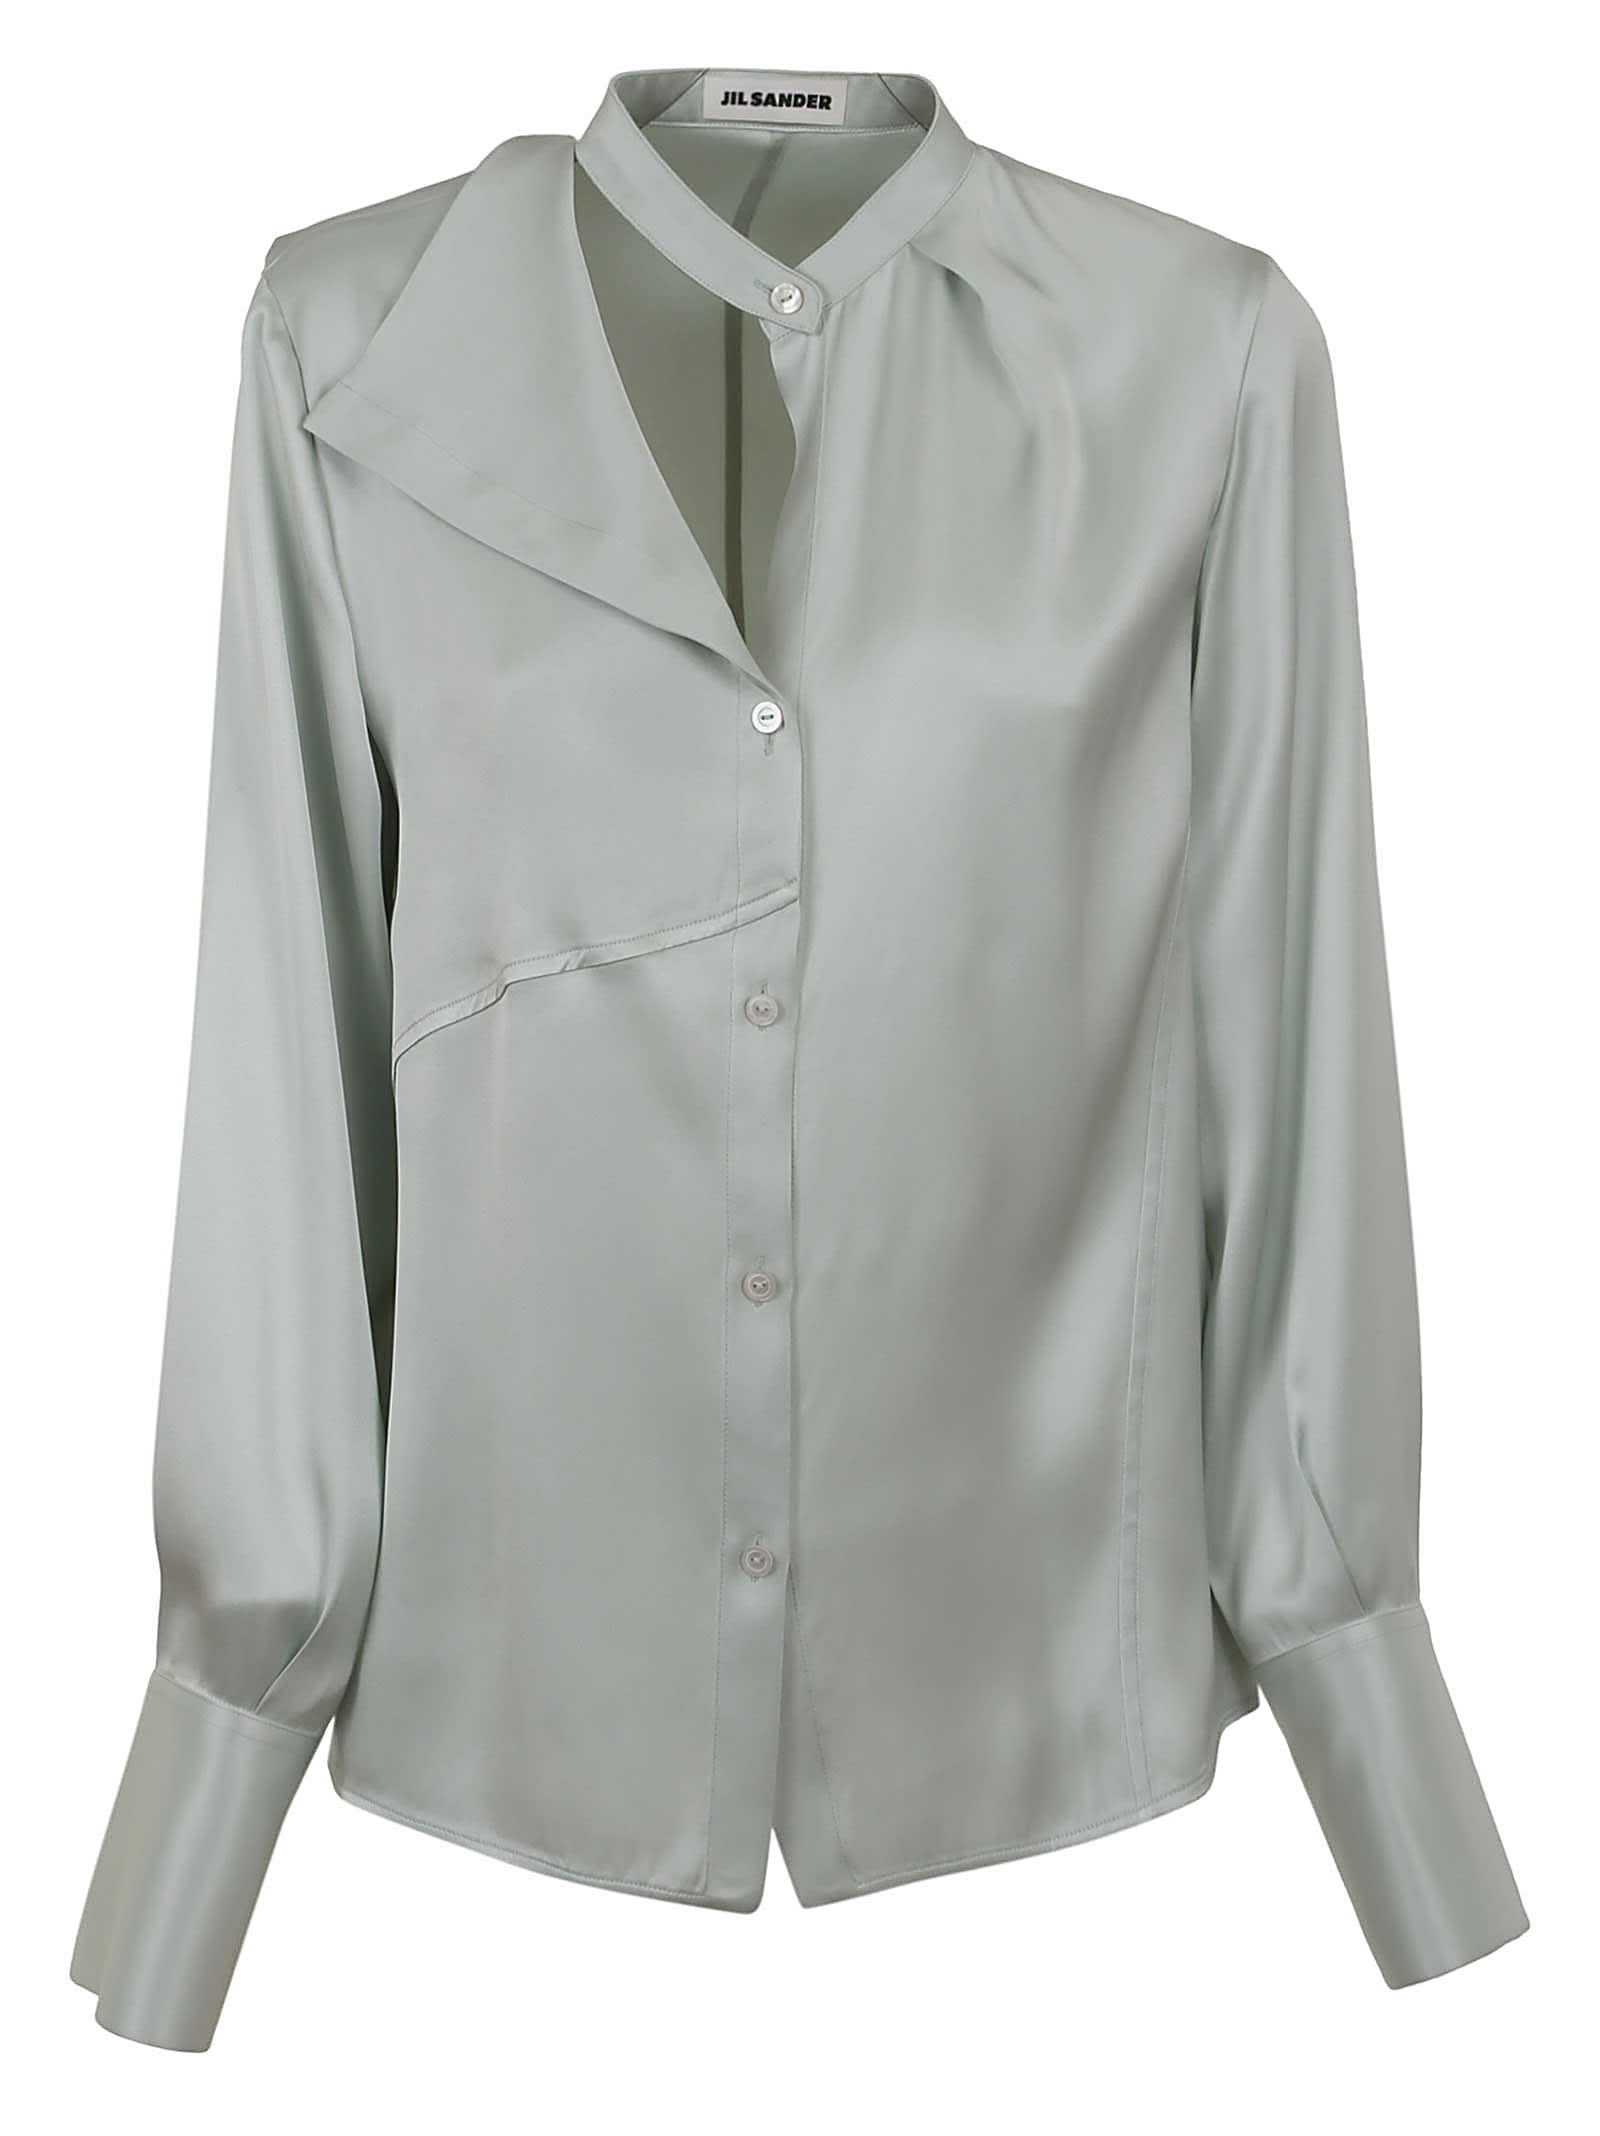 Shop Jil Sander Fitted Blouse With Stand Collar, Draped Front.